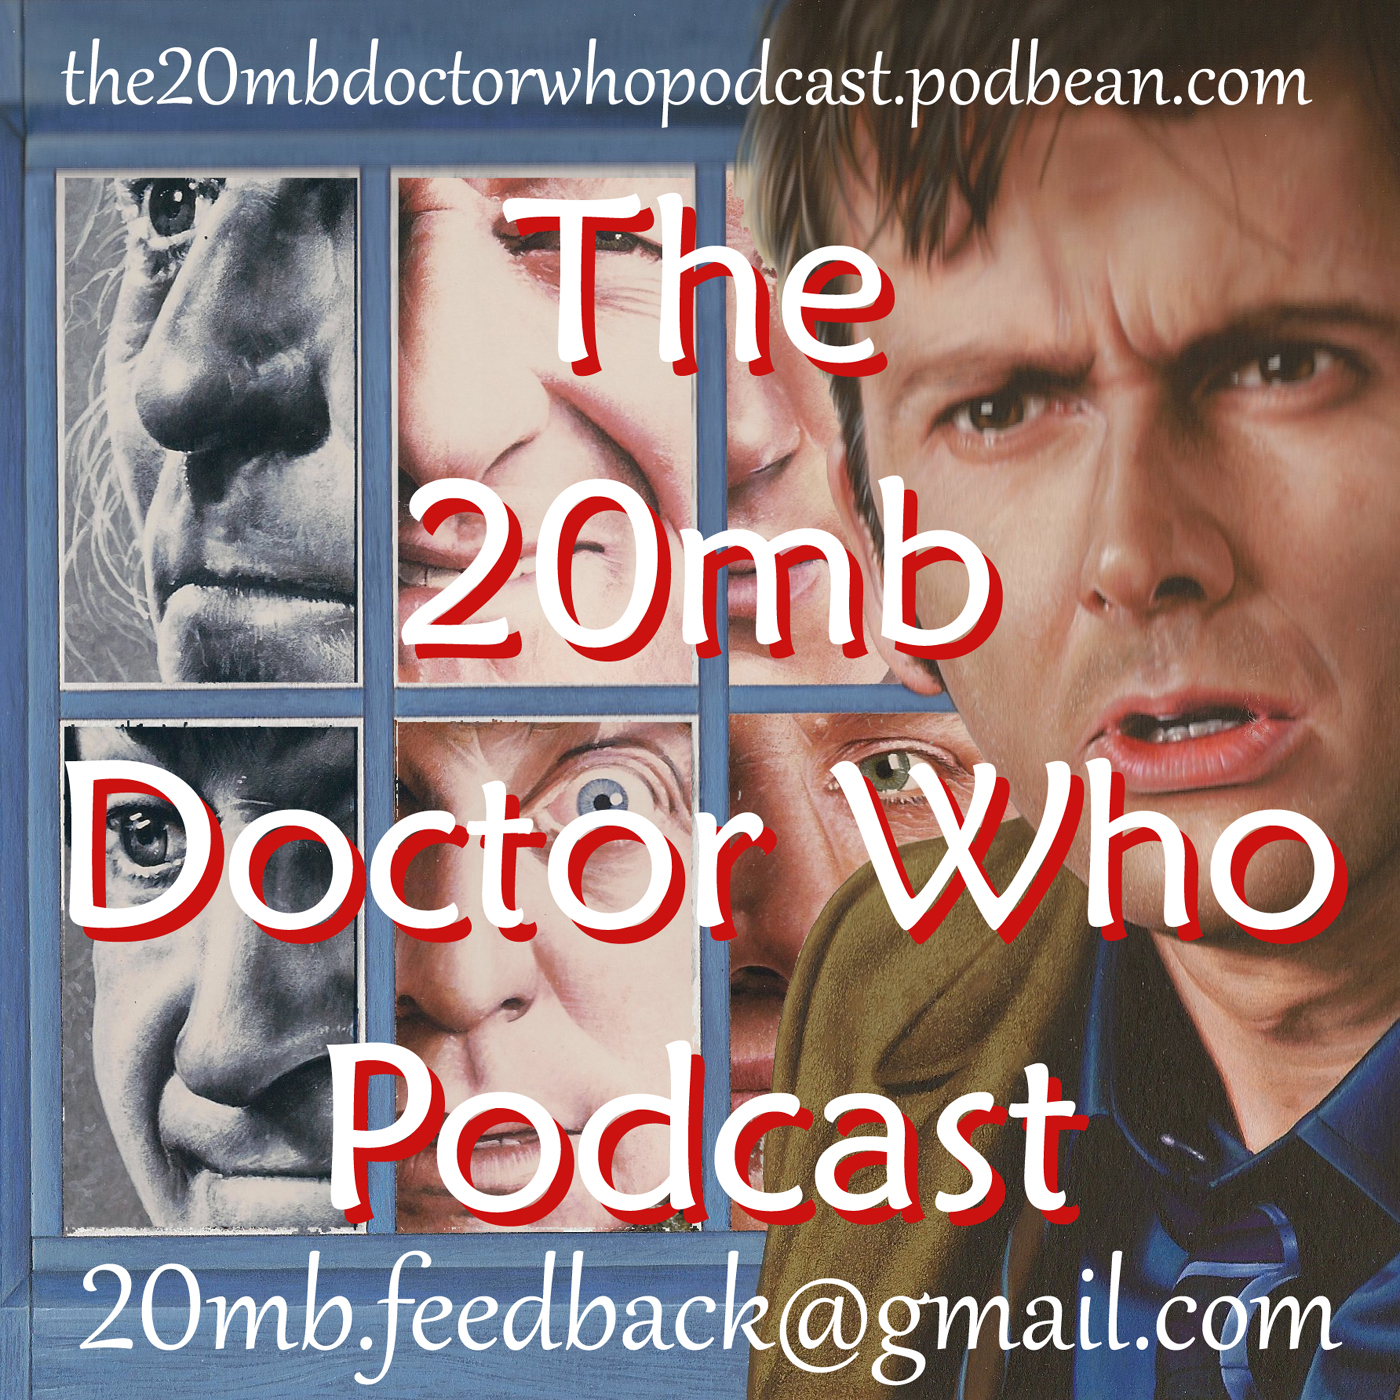 The 20mb Doctor Who Podcast #174